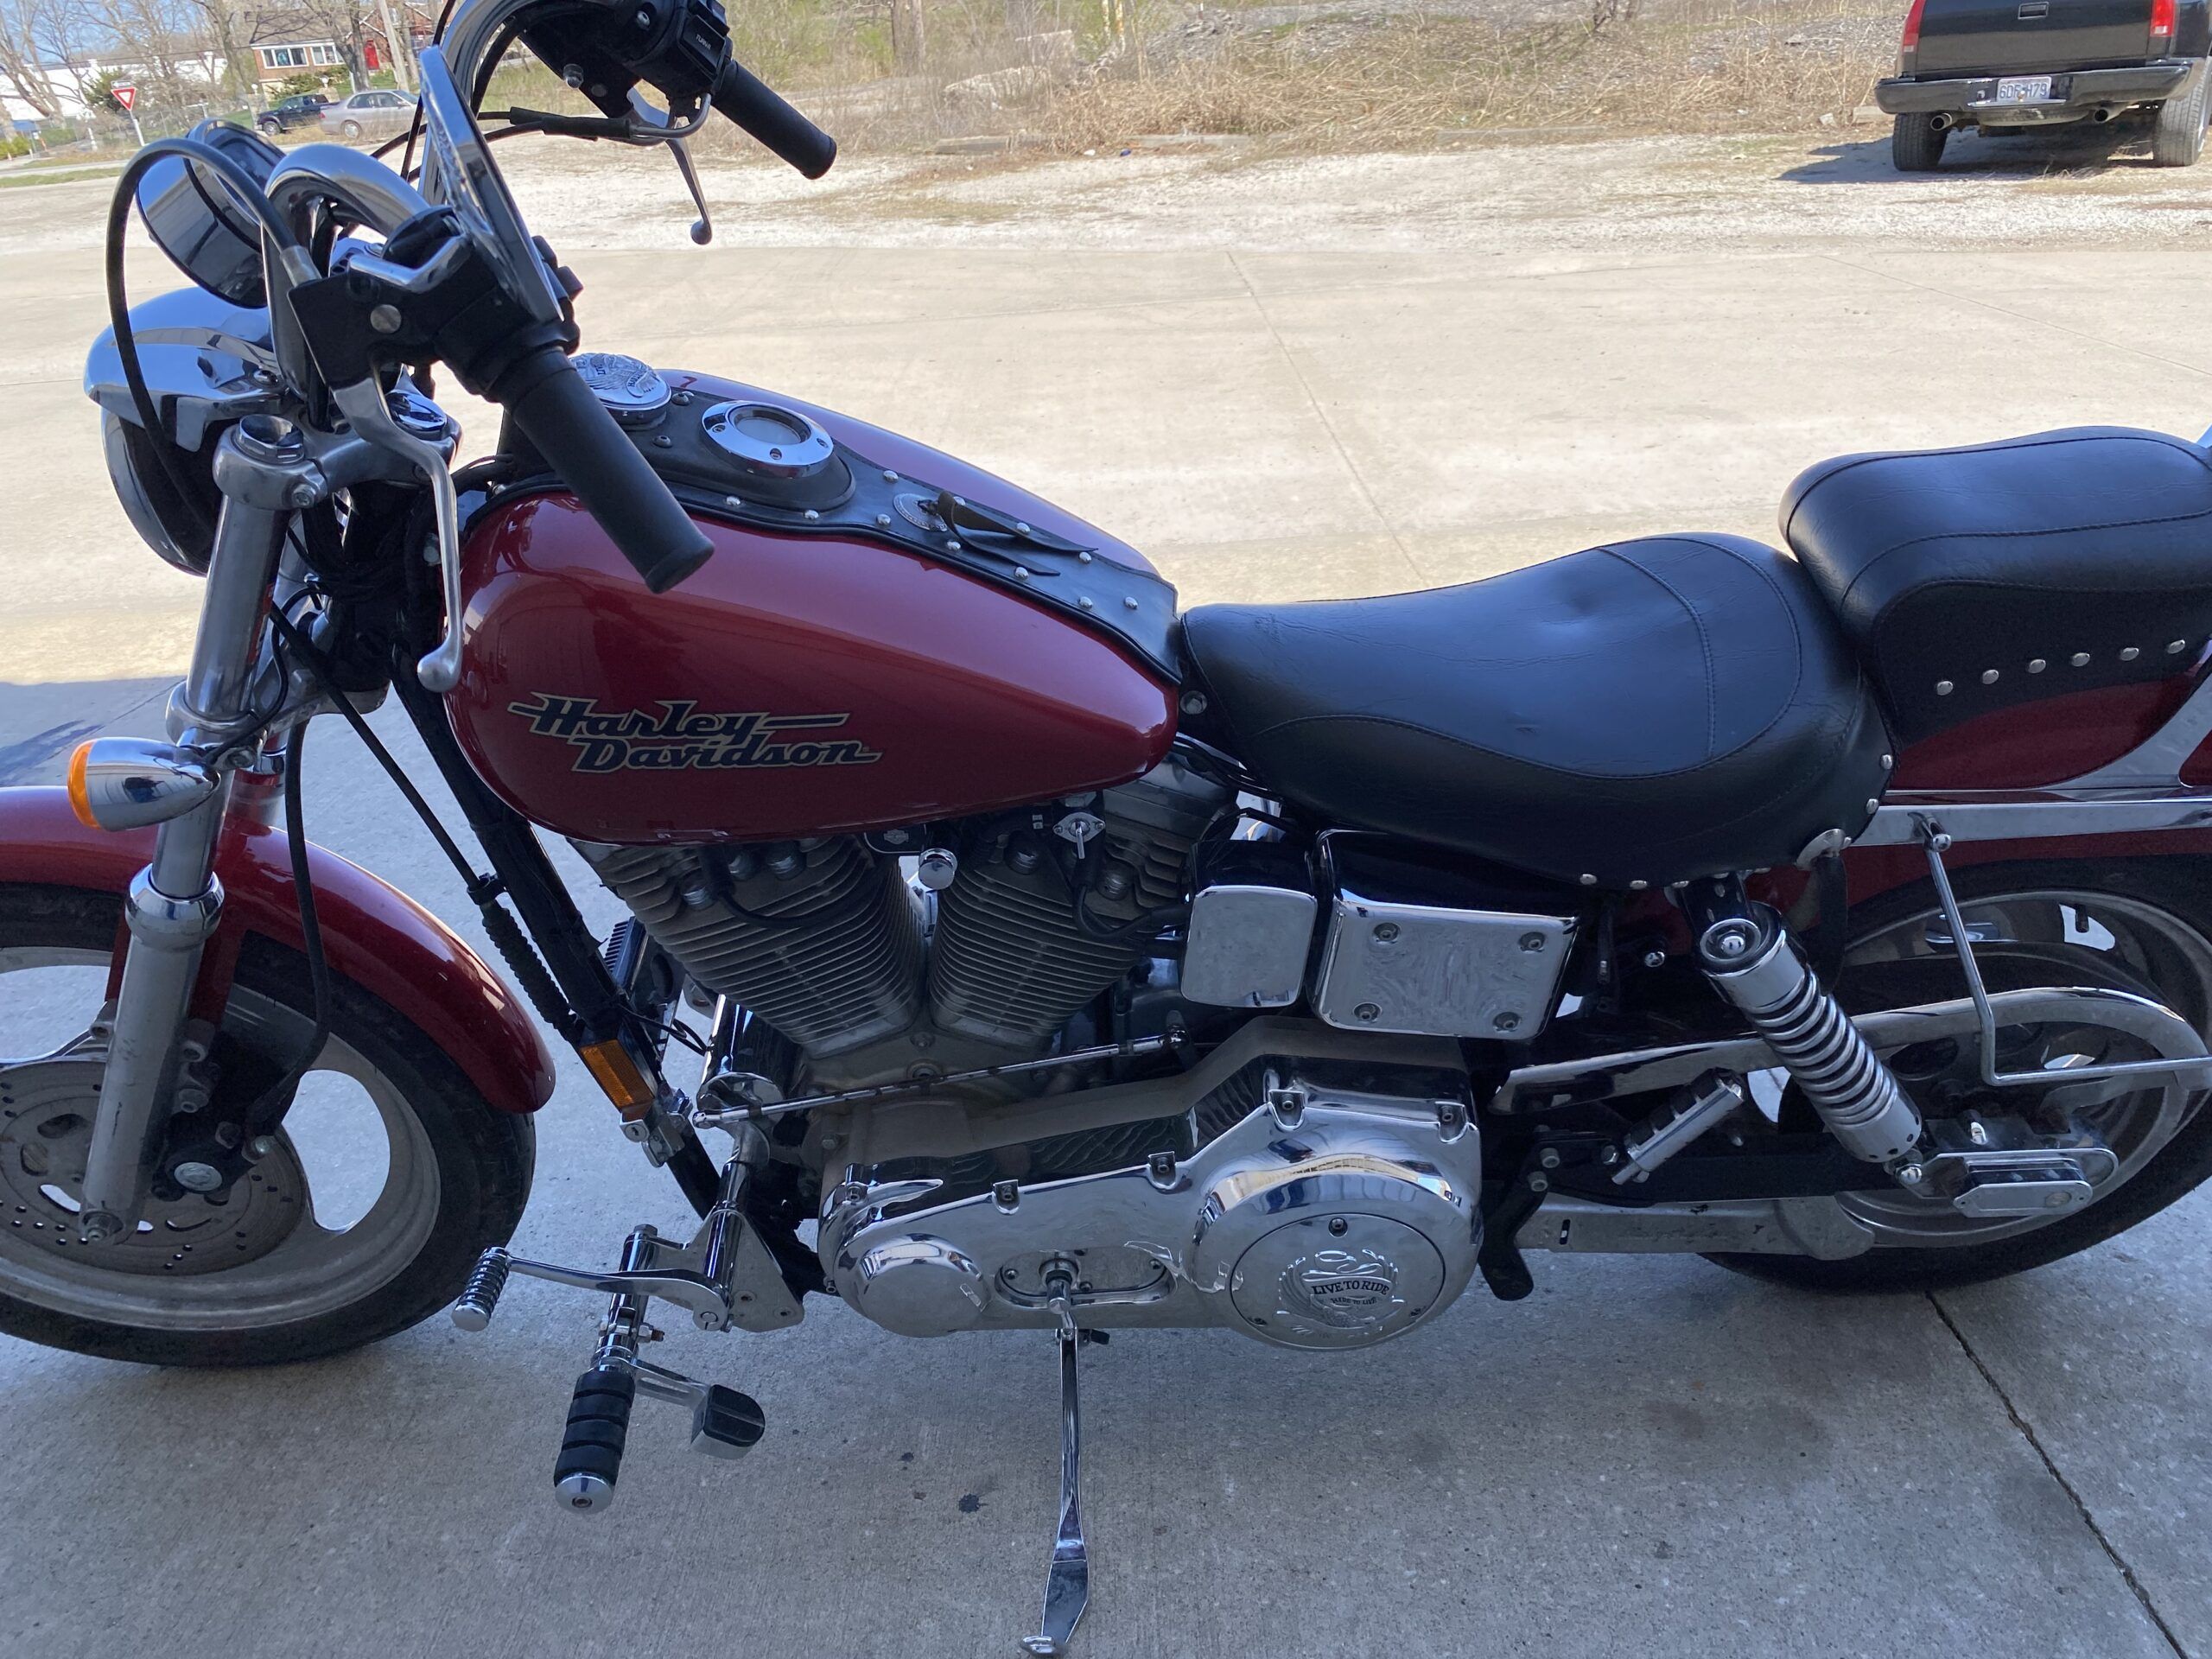 1995 Harley Davidson Dyna Super Glide 1340ci - Low Miles for sale at Knobtown Cycle